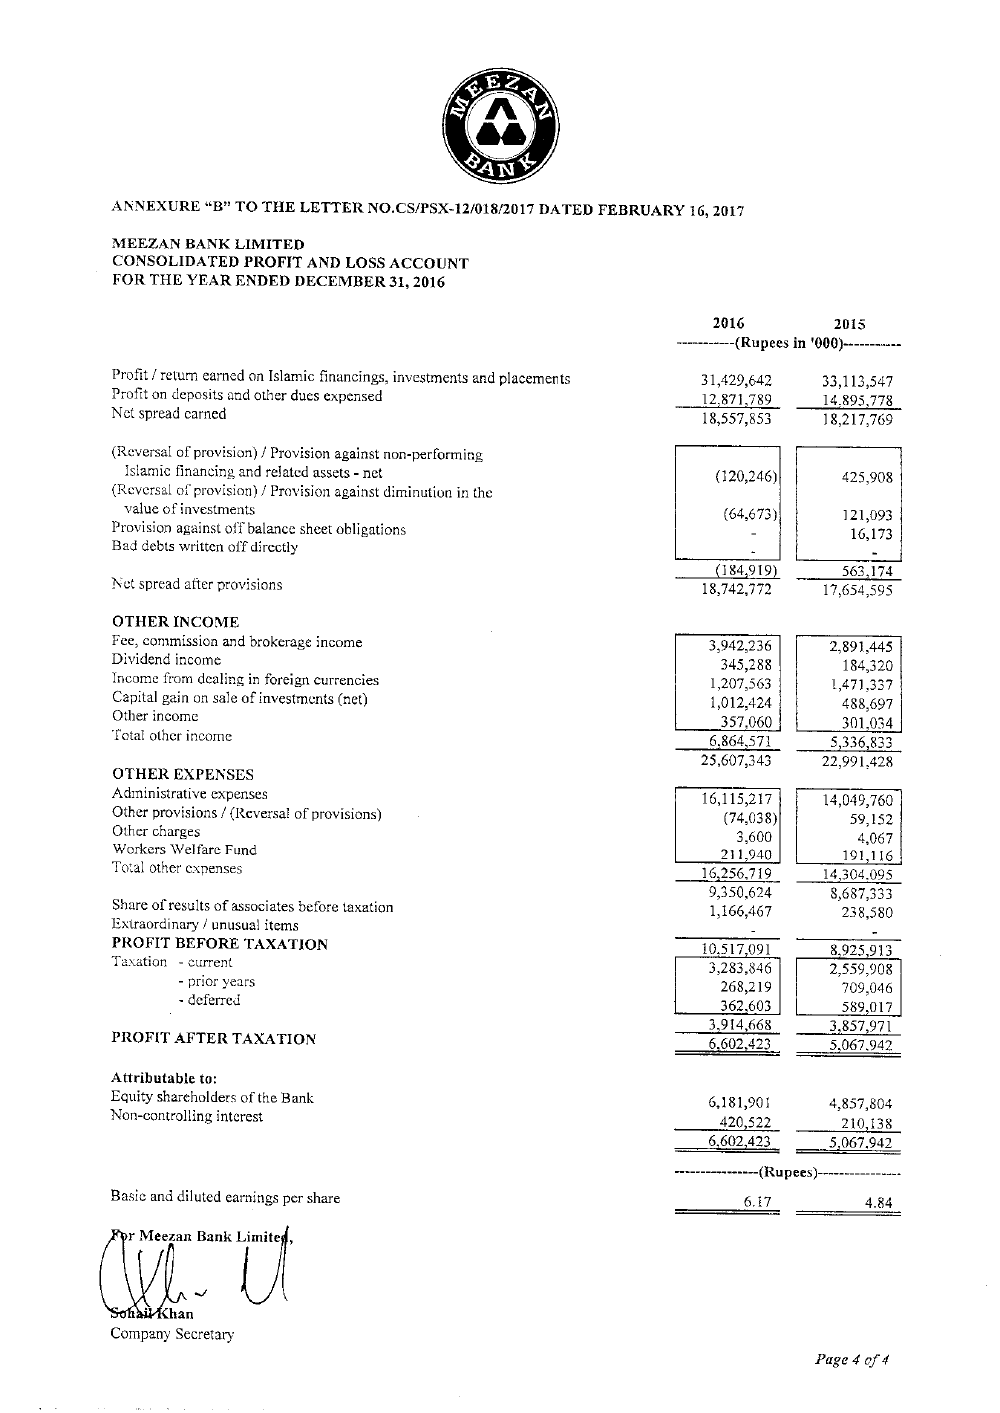 Financial Results for the Year Ended December 31, 2016